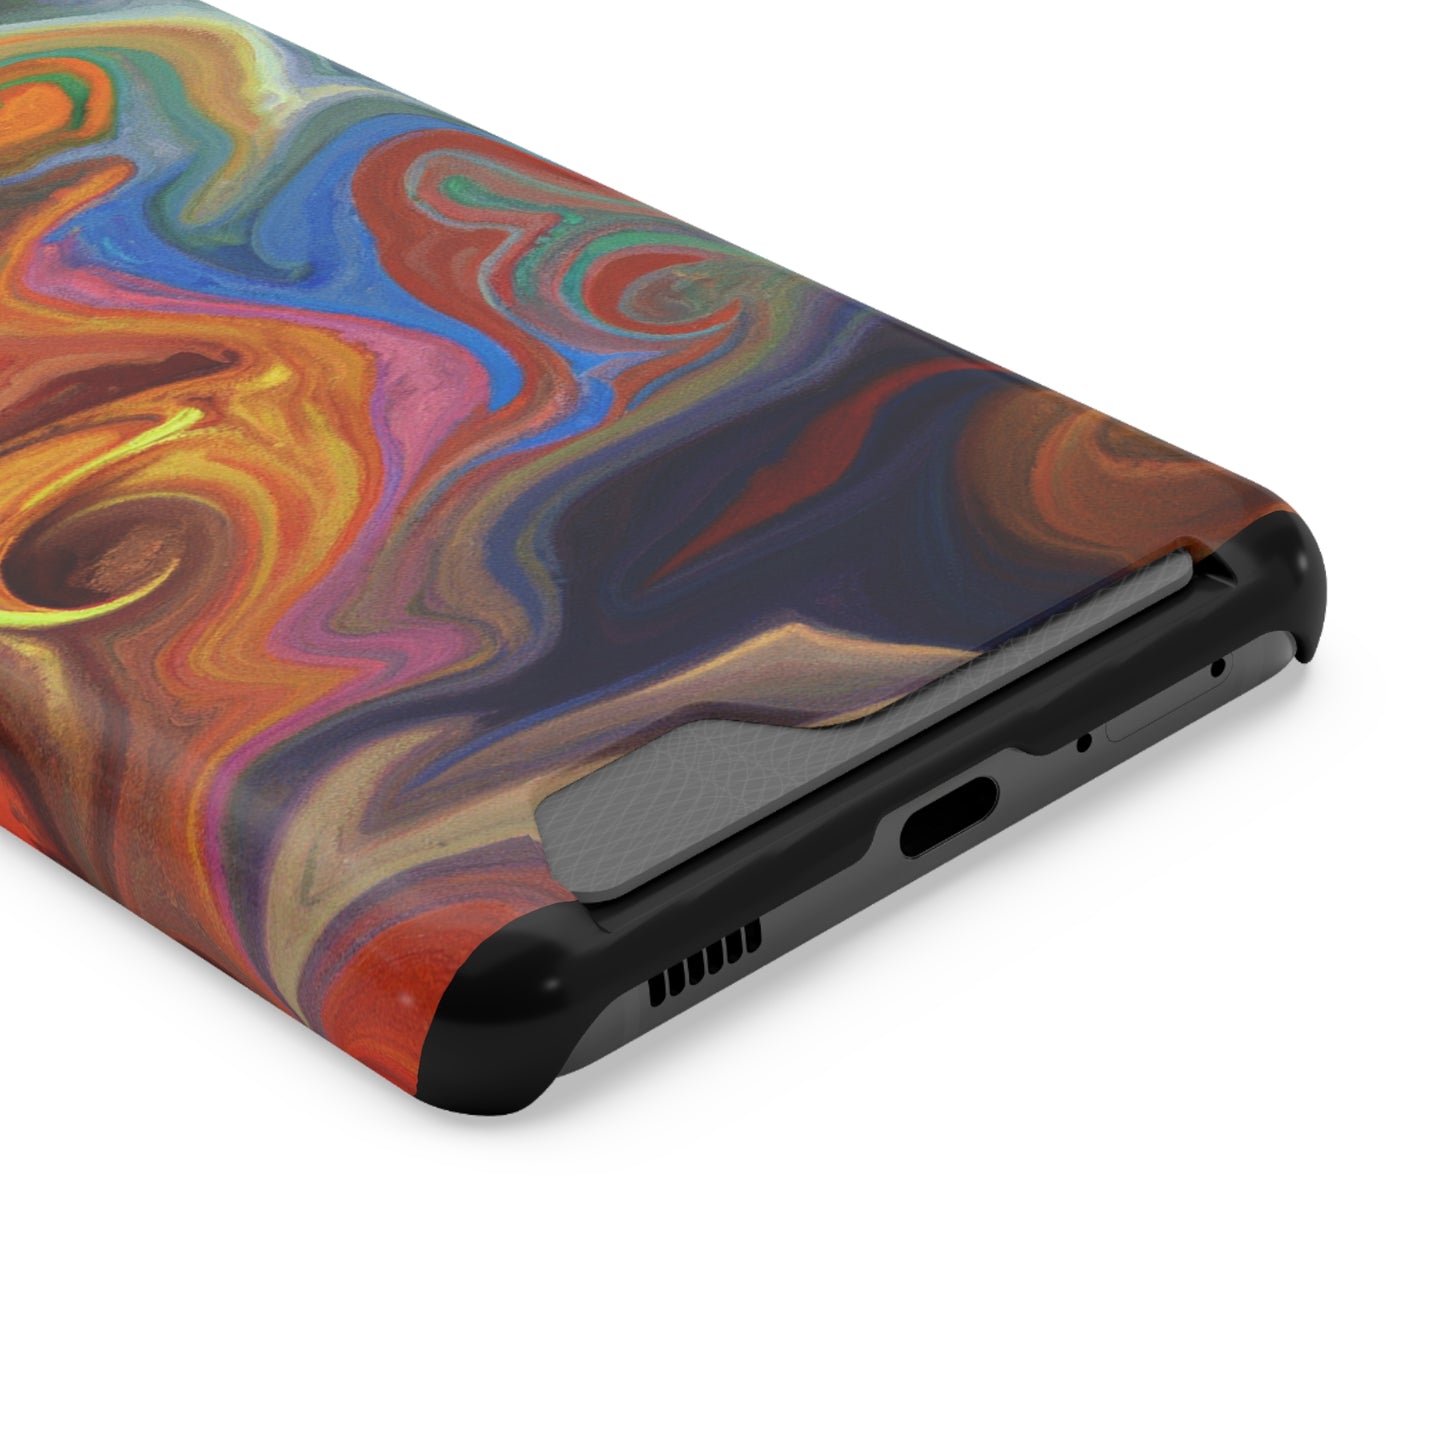 iPhone or Samsung Case with Card Holder Ft. Fractured Waves